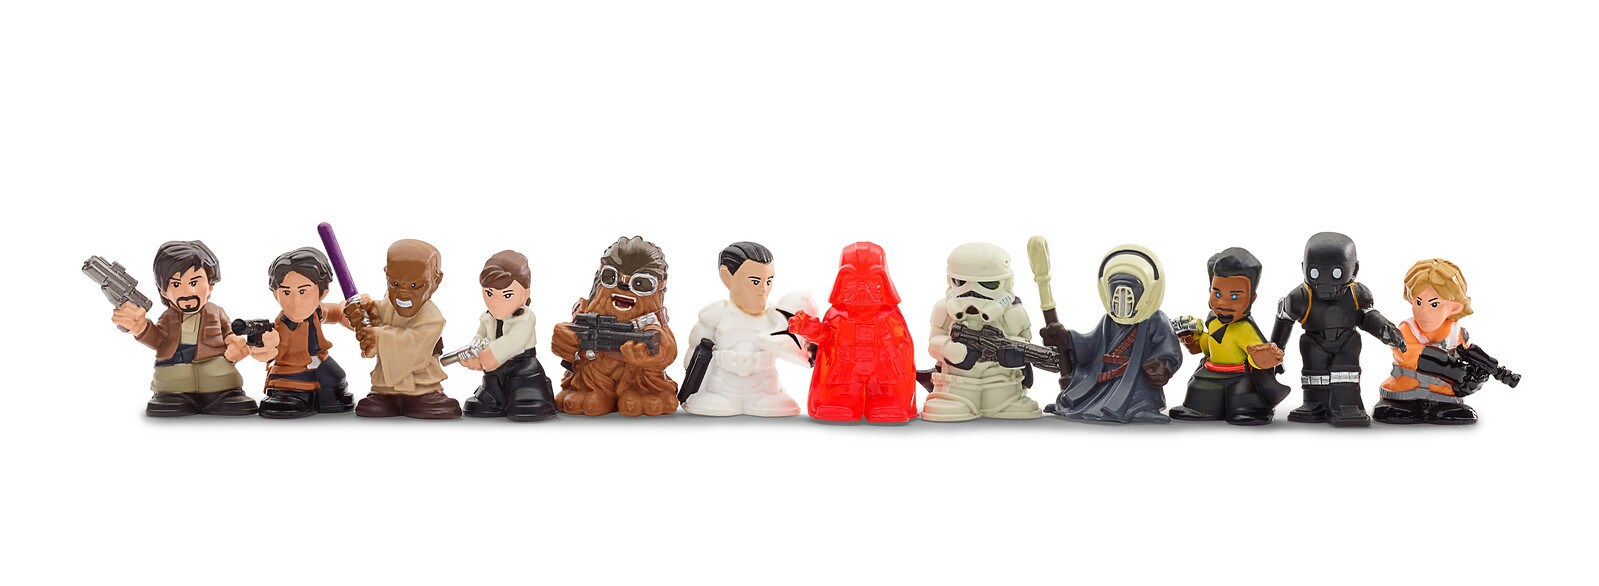 A row of Star Wars Micro Force miniature figures.